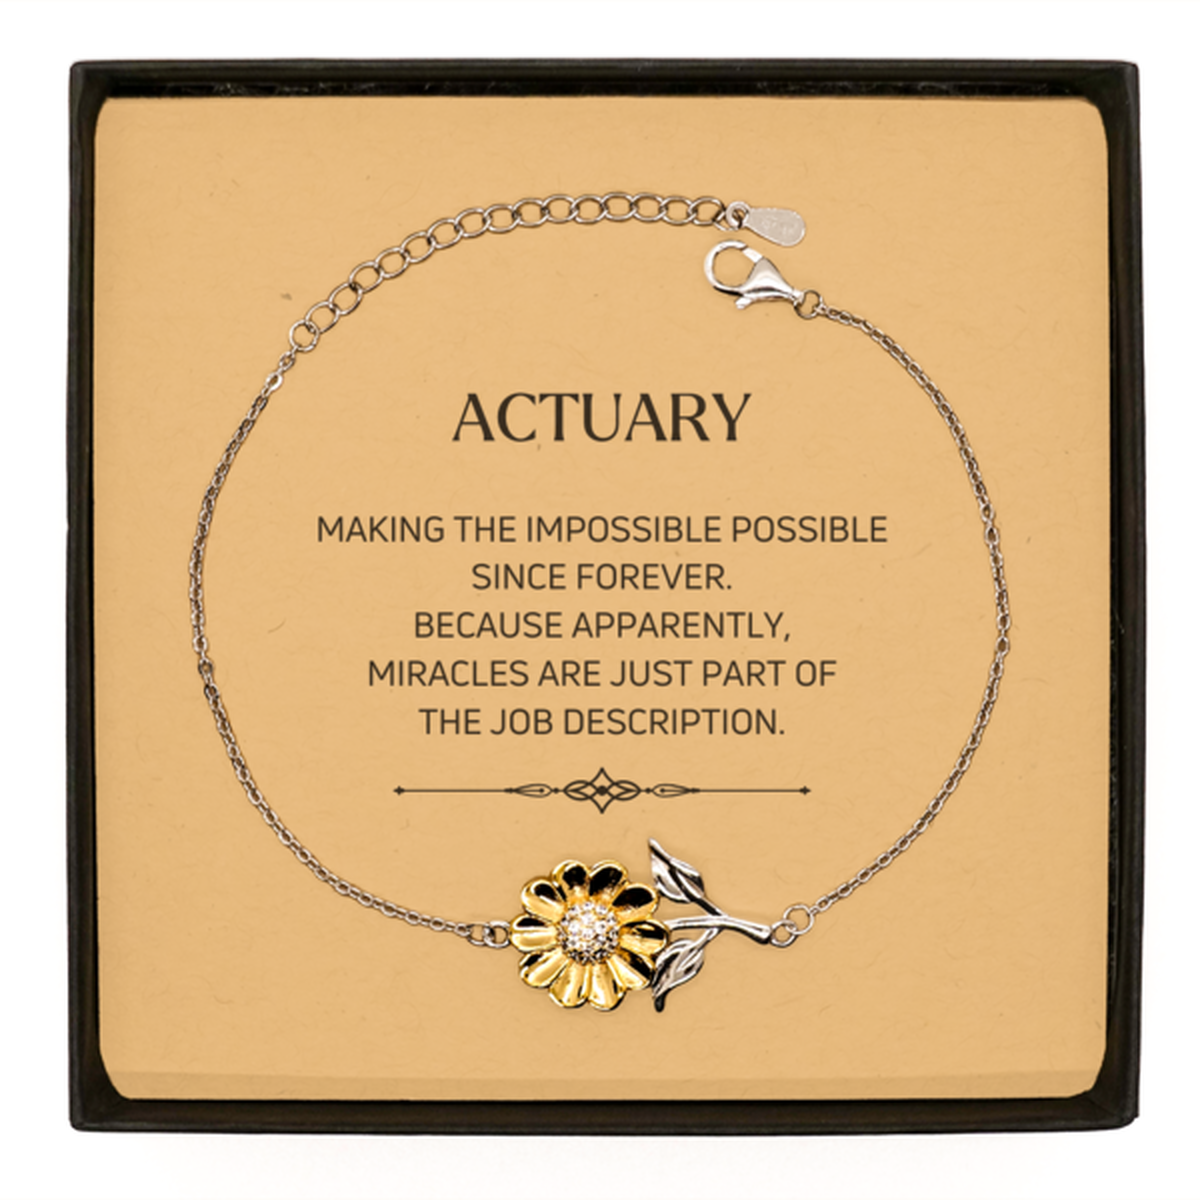 Funny Actuary Gifts, Miracles are just part of the job description, Inspirational Birthday Sunflower Bracelet For Actuary, Men, Women, Coworkers, Friends, Boss